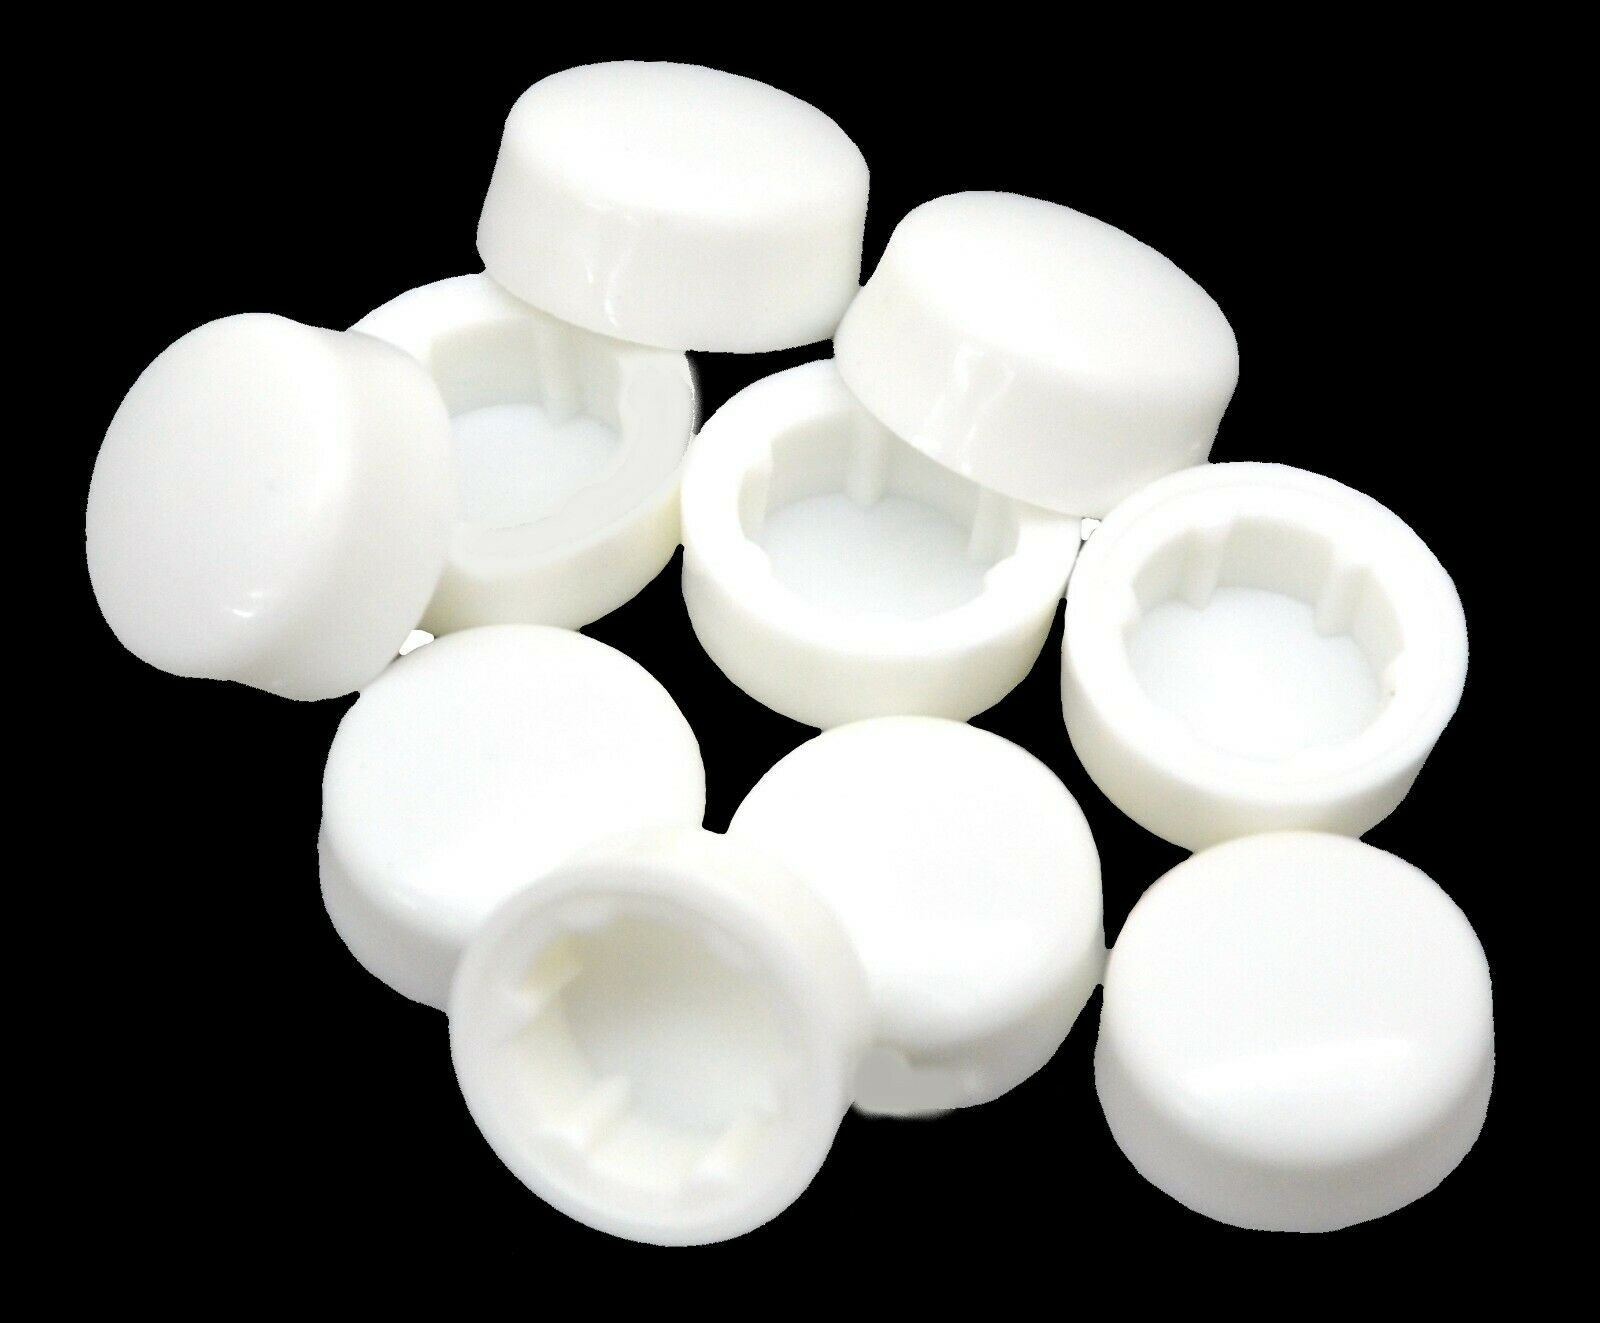 Hex Head Bolt Or Nut Cover 1/2" White Abs Plastic Dome Shaped Push On Set Of 10